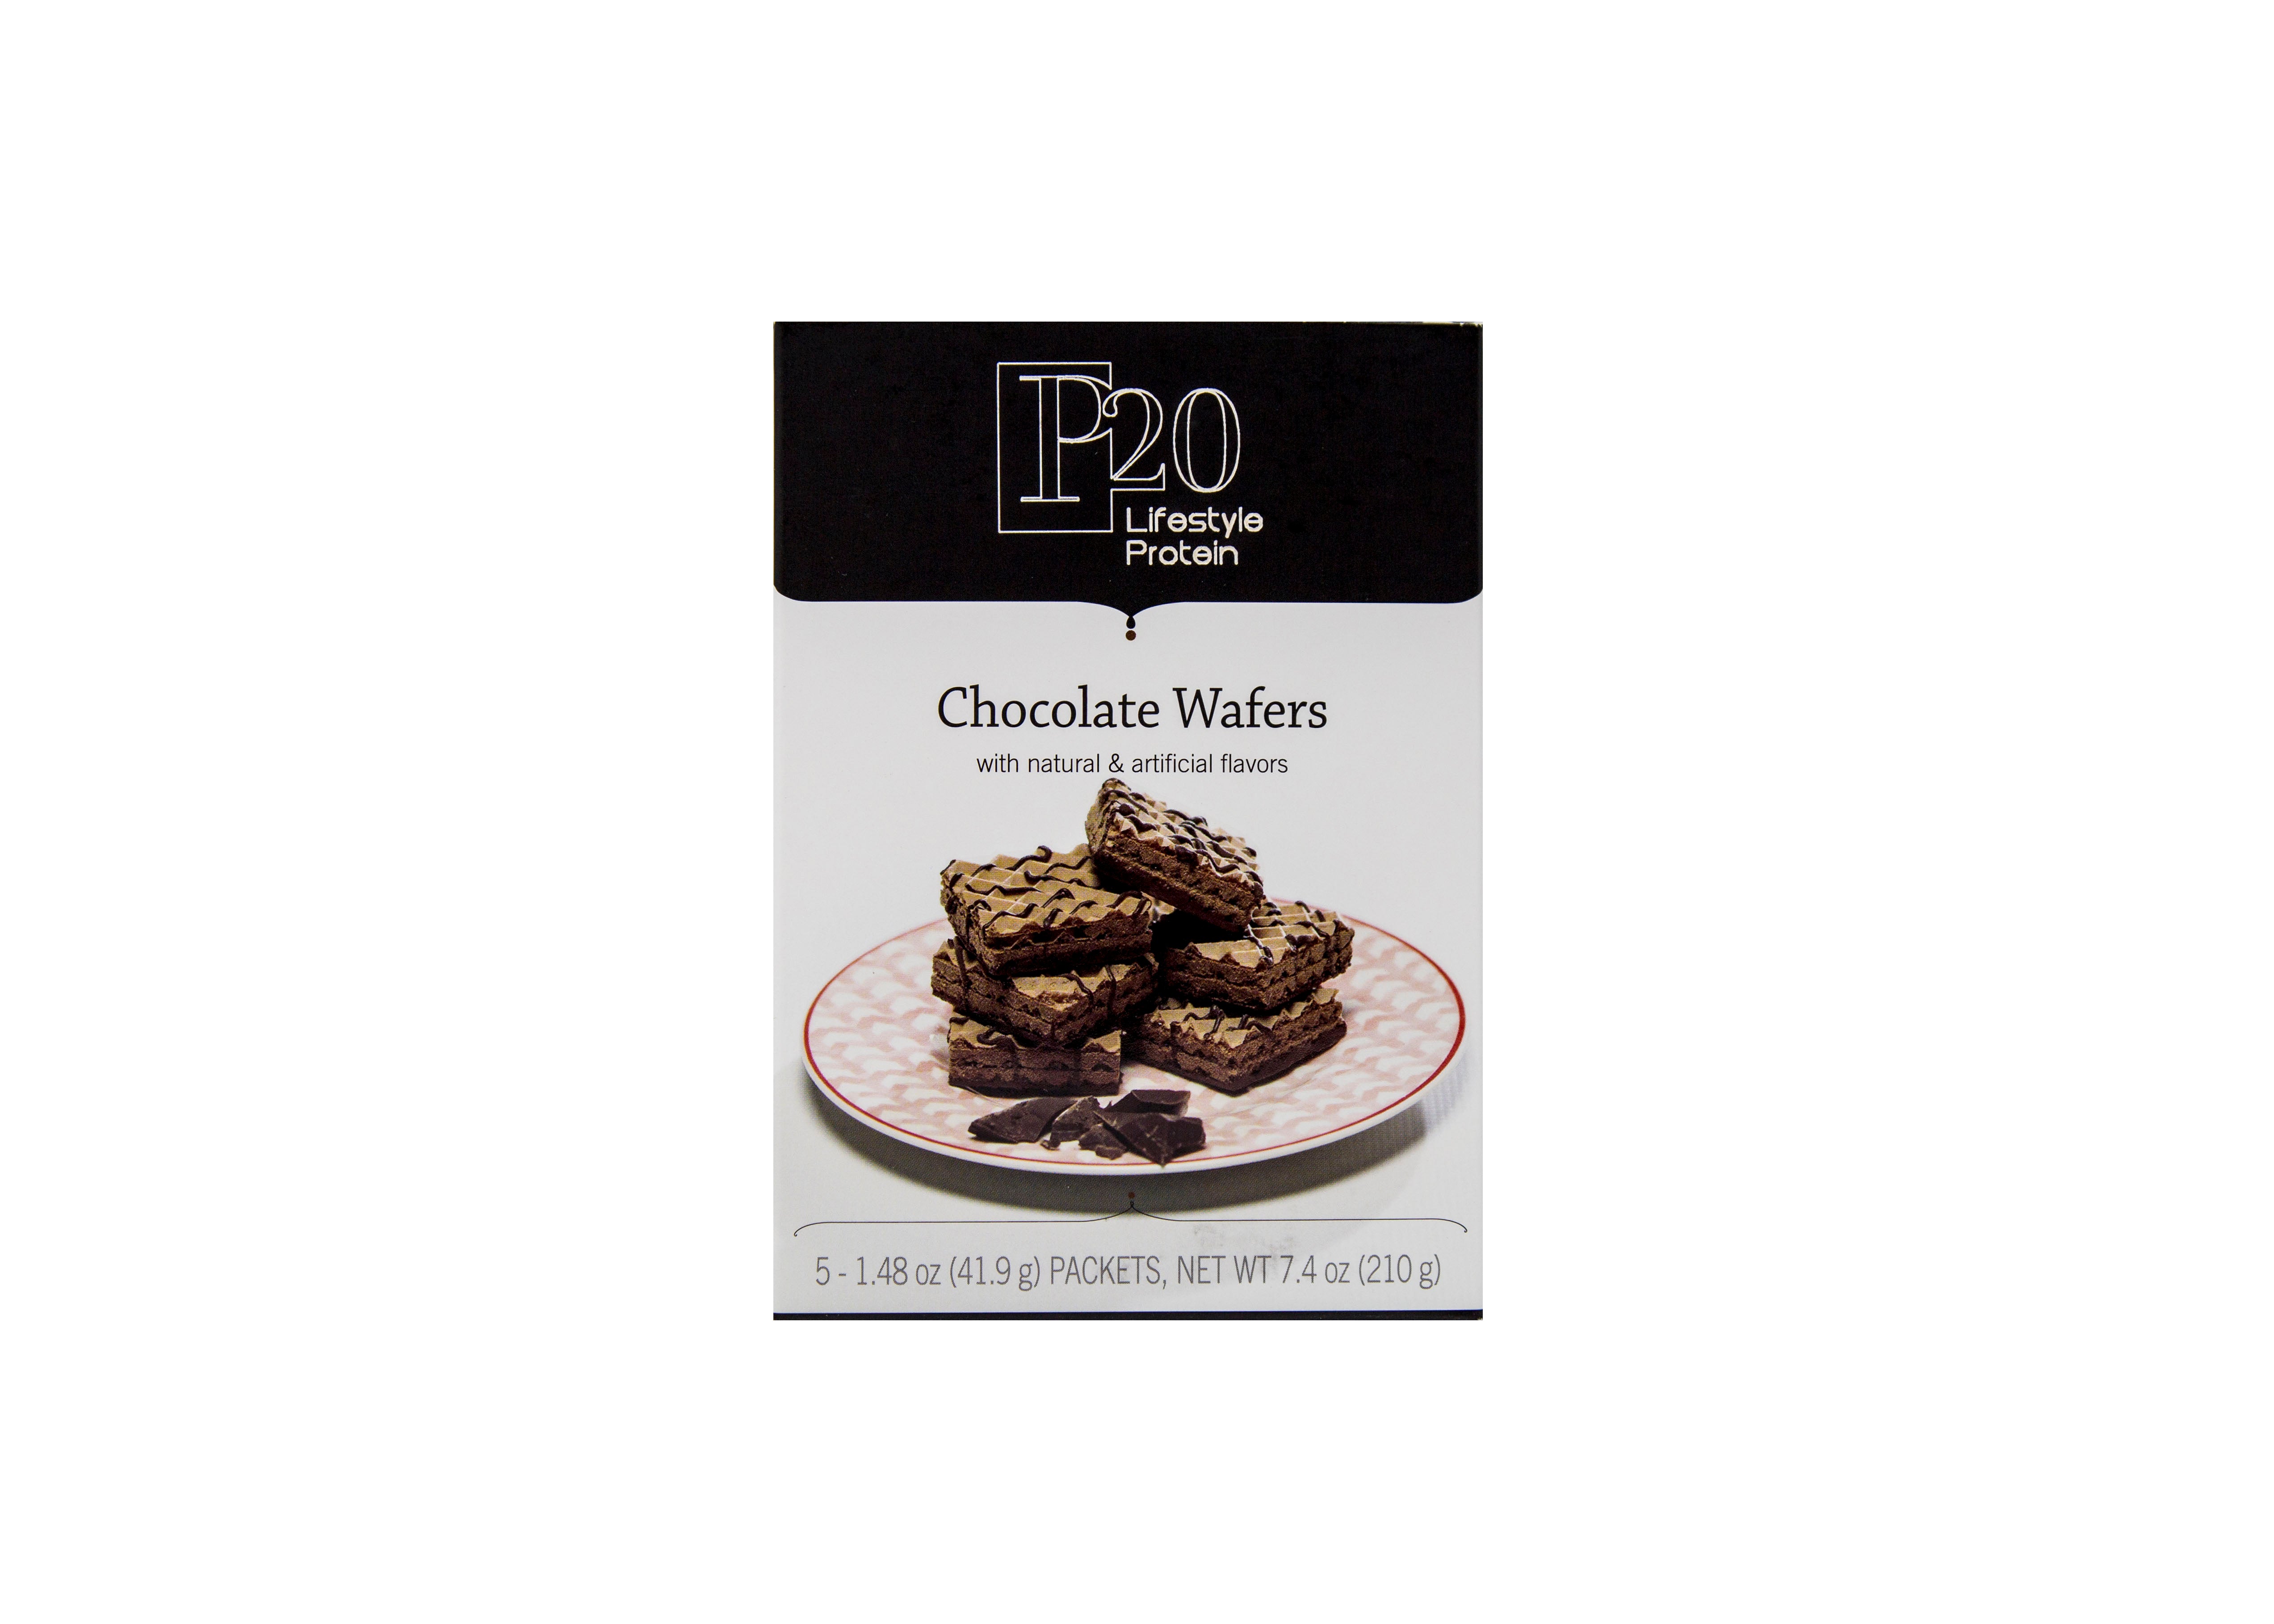 P20 Lifestyle Protein Chocolate Wafers